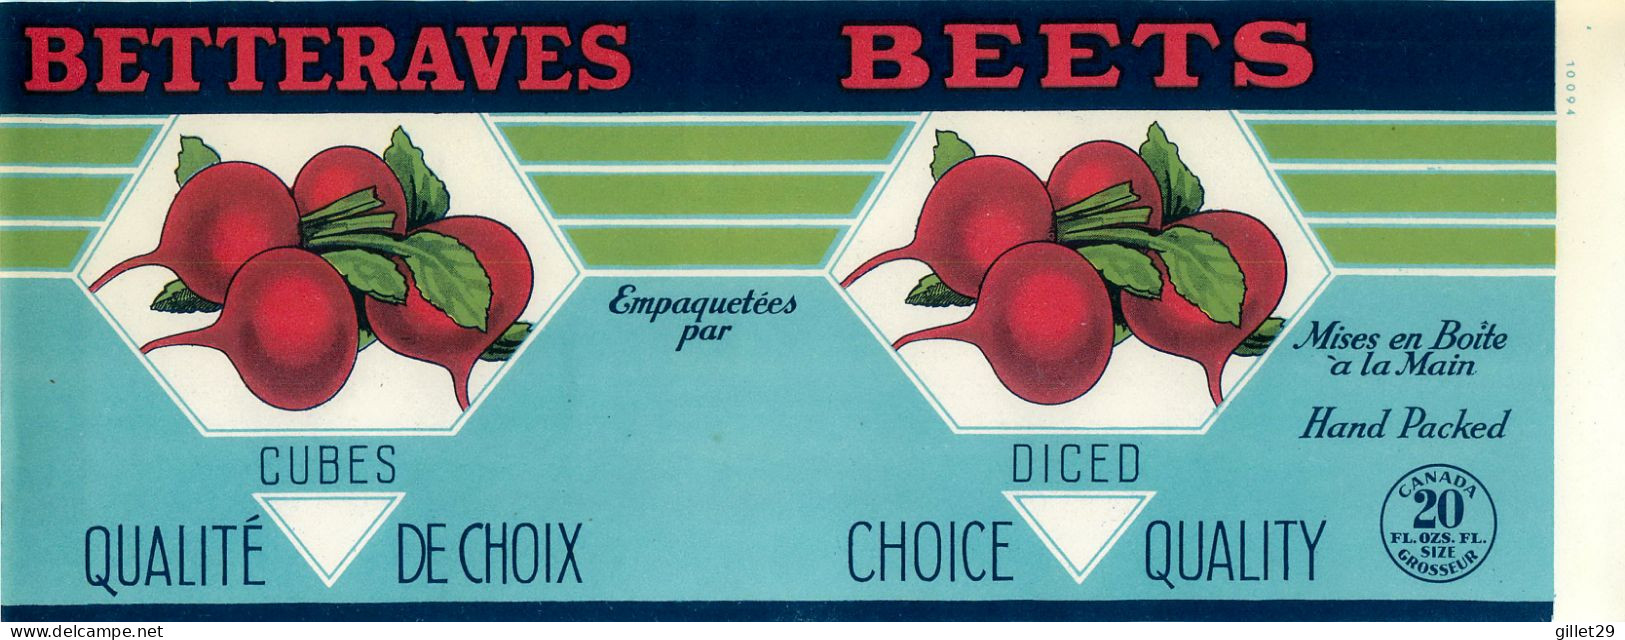 ÉTIQUETTES - BETTERAVES - BEETS - HAND PACKED - 20 OZS CANADA - DIMENSION 11 X 27 Cm - - Fruits & Vegetables